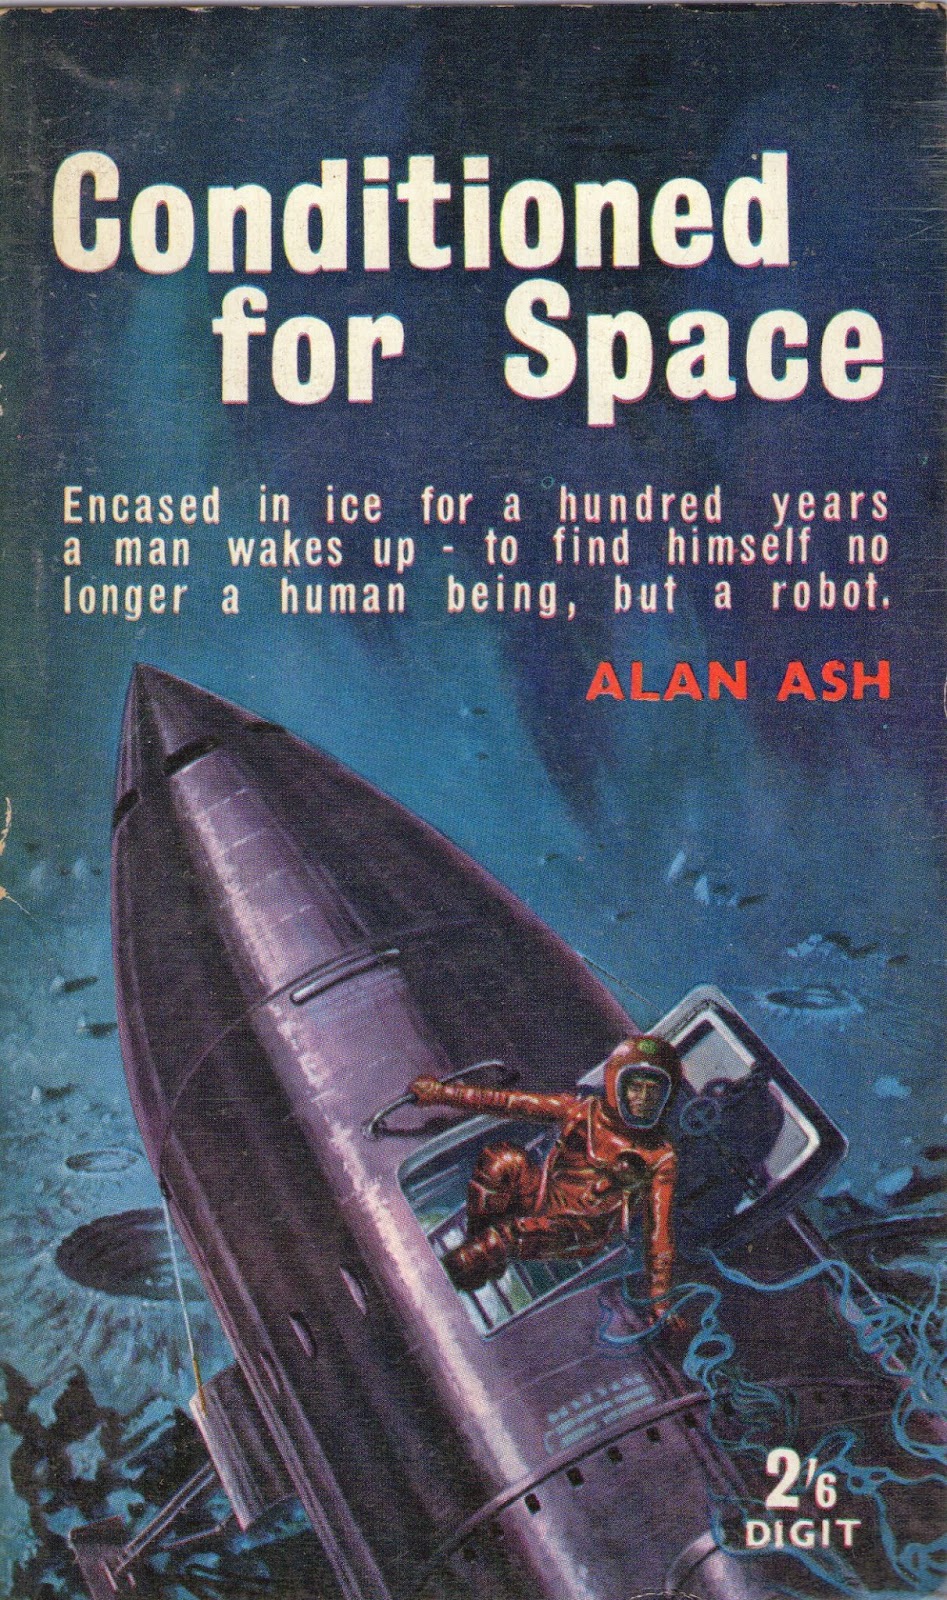 Conditioned for Space by Alan Ash, as published by Digit Books (1963)